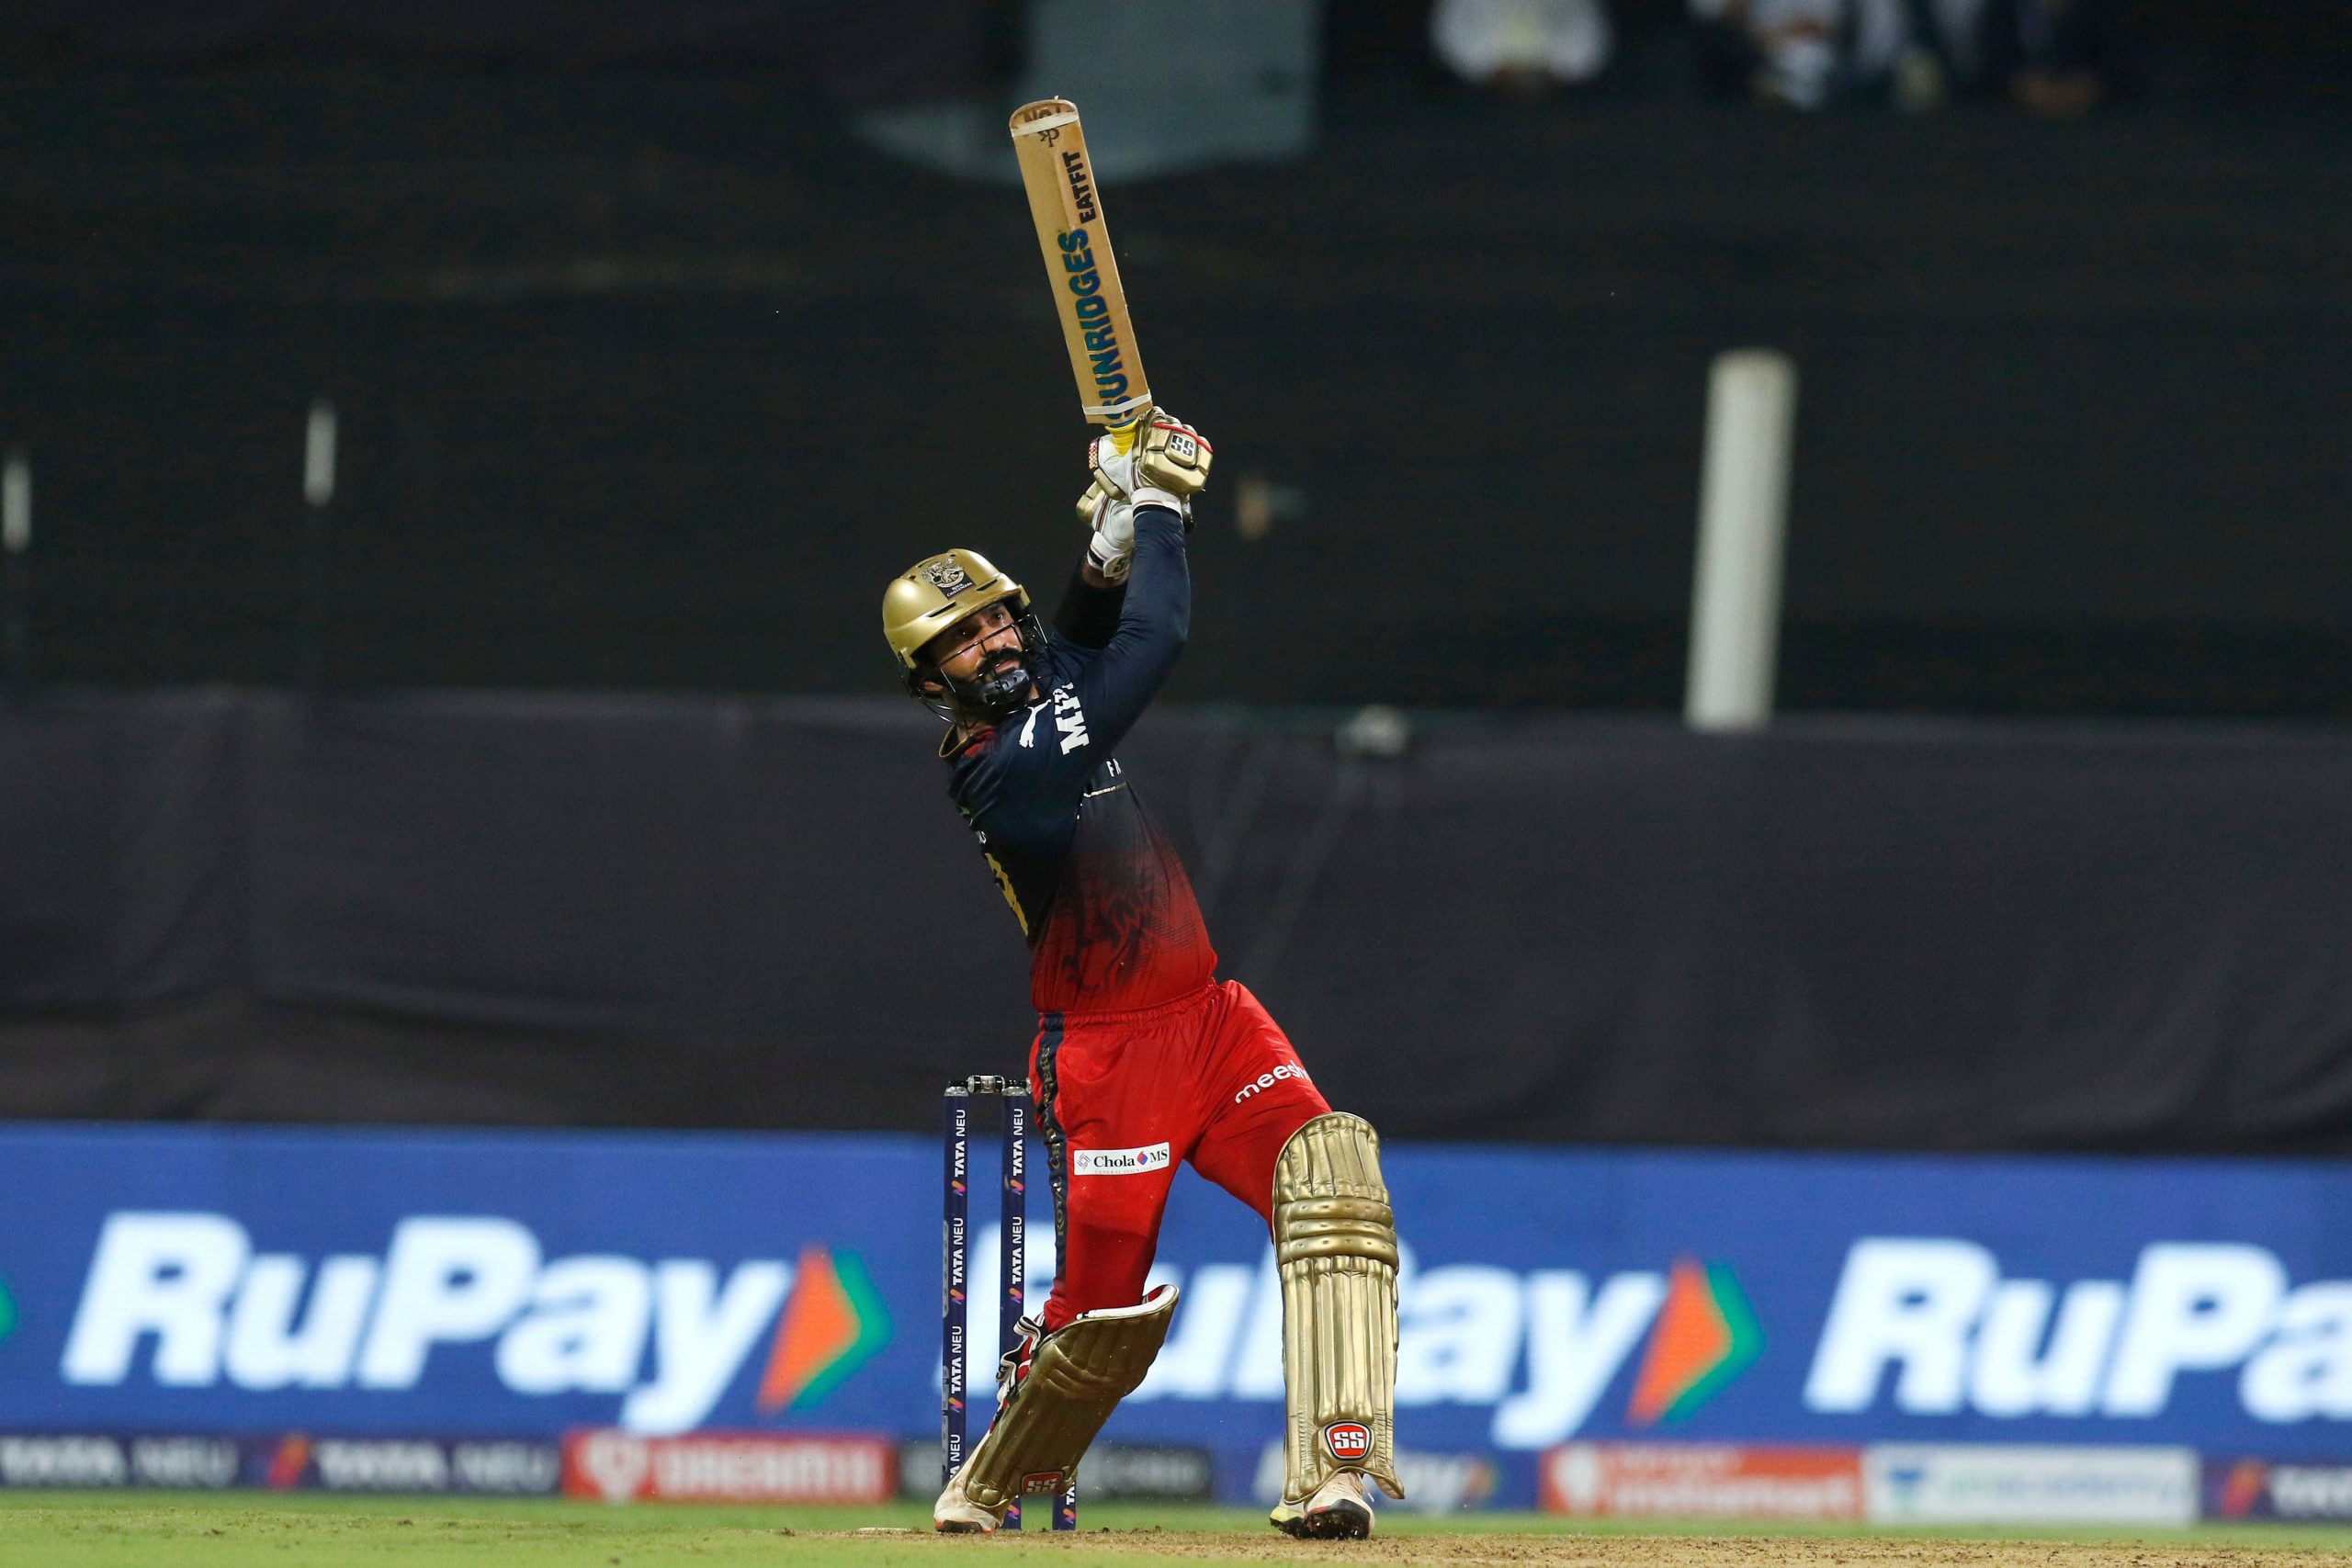 Karthik indebted to RCB for India comeback, eyes spot in T20 World Cup